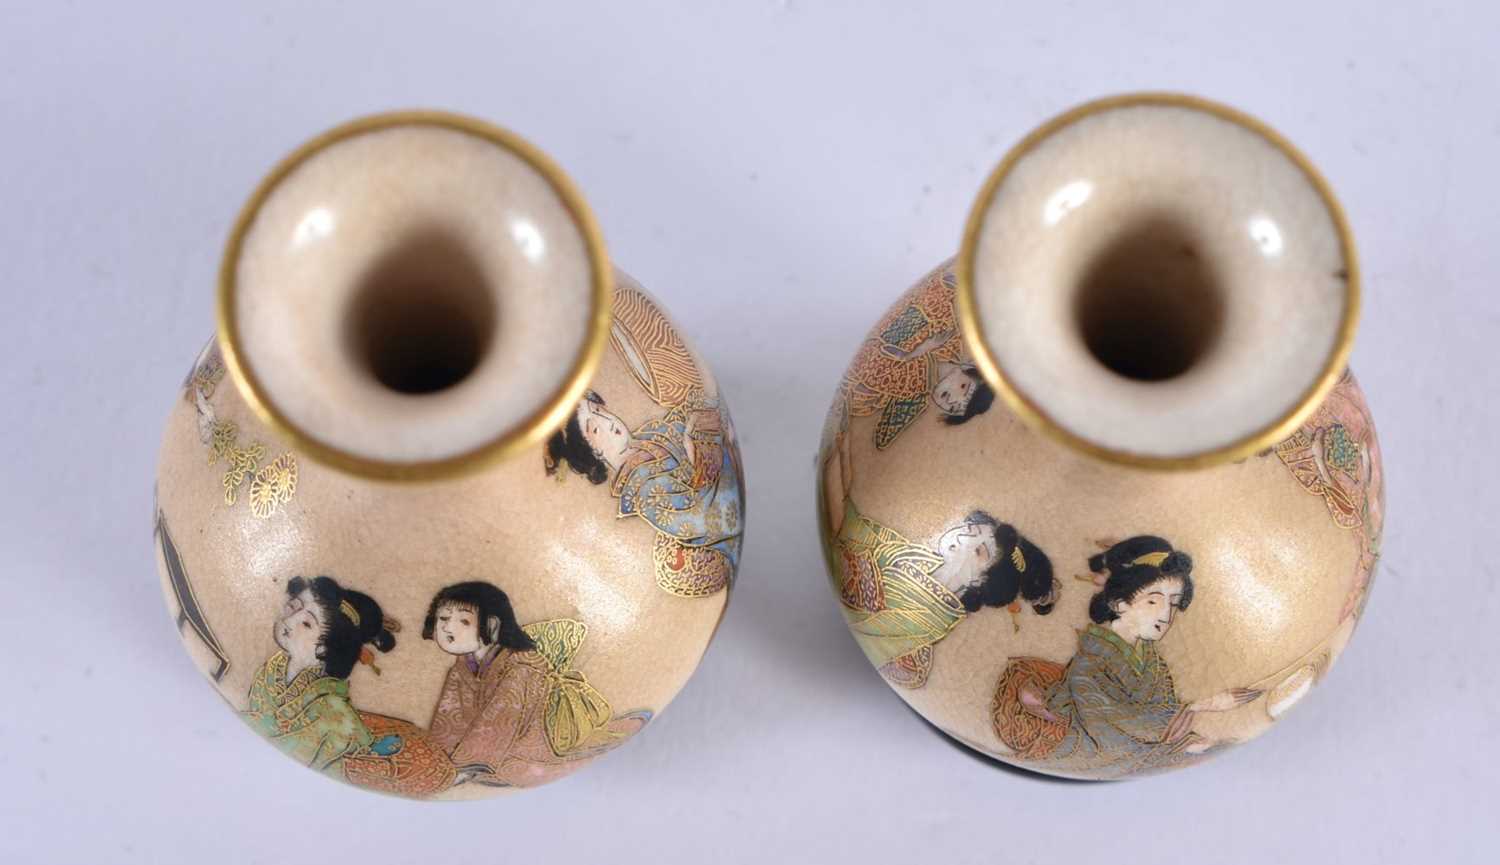 A RARE MINIATURE PAIR OF LATE 19TH CENTURY JAPANESE MEIJI PERIOD SATSUMA VASES painted with - Image 6 of 7